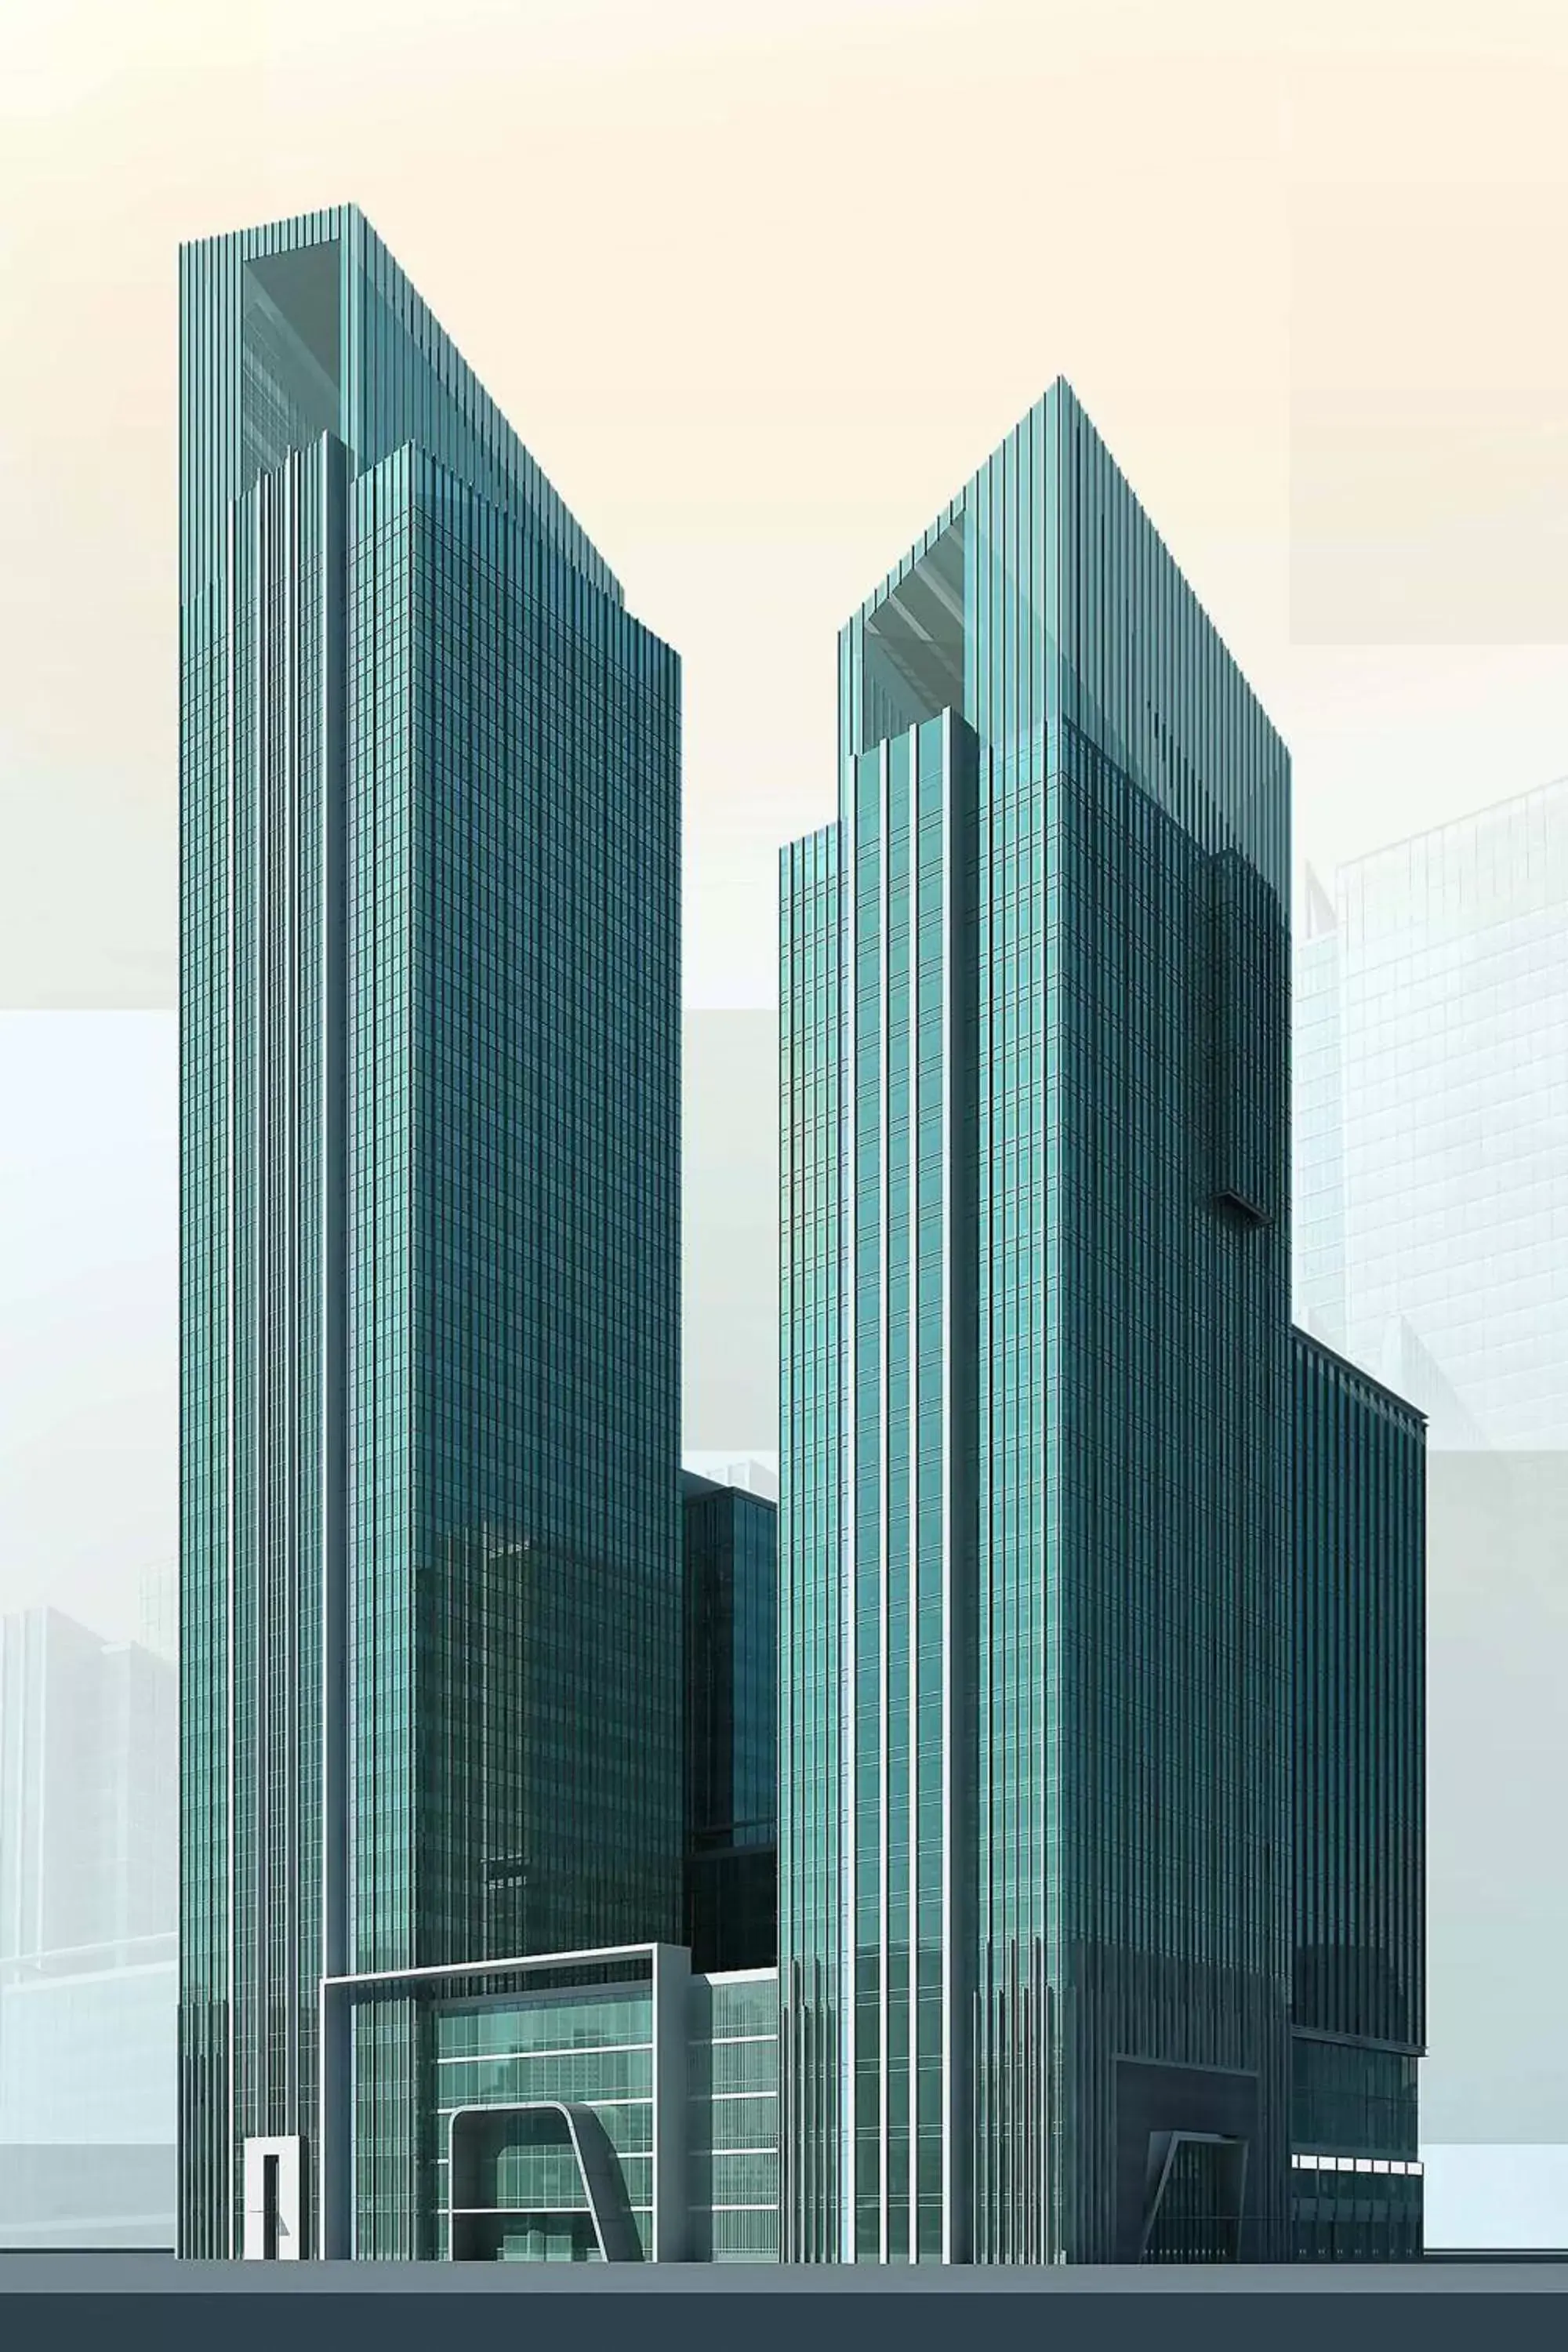 Property Building in The Westin Tianjin